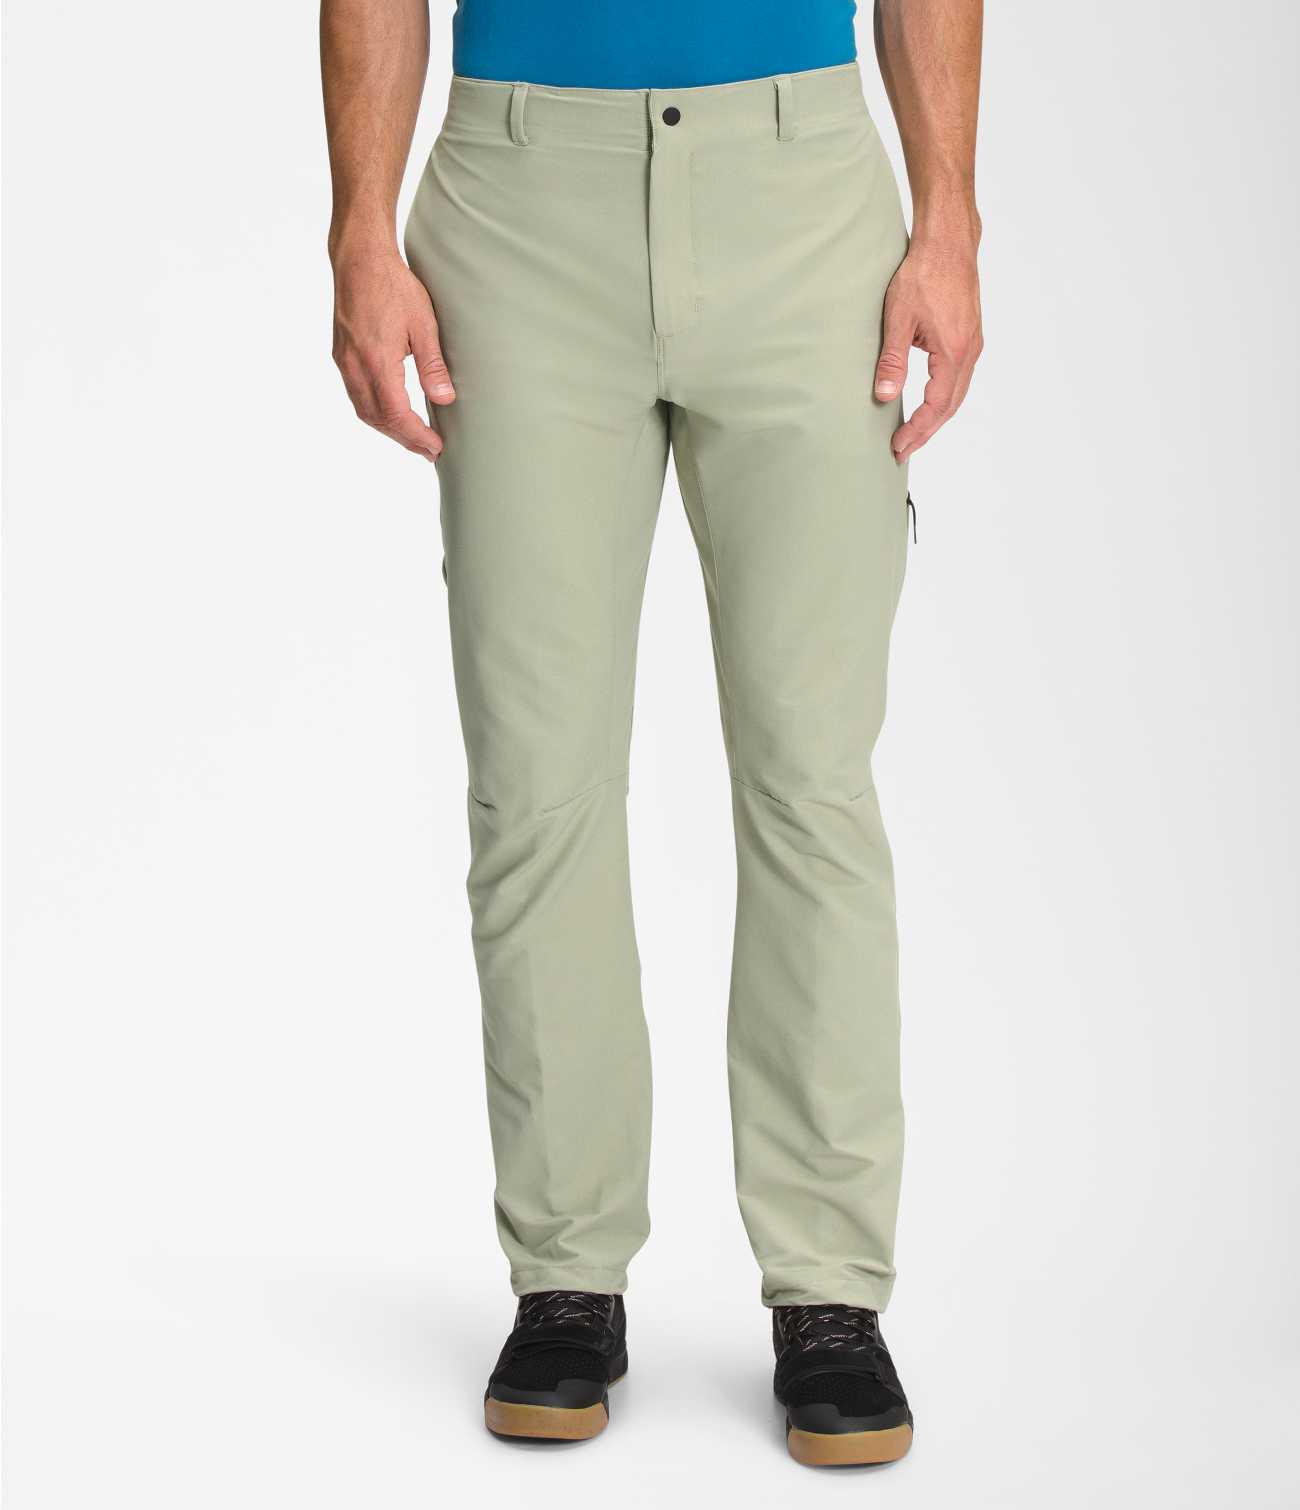 The North Face Men's Paramount Active Pants